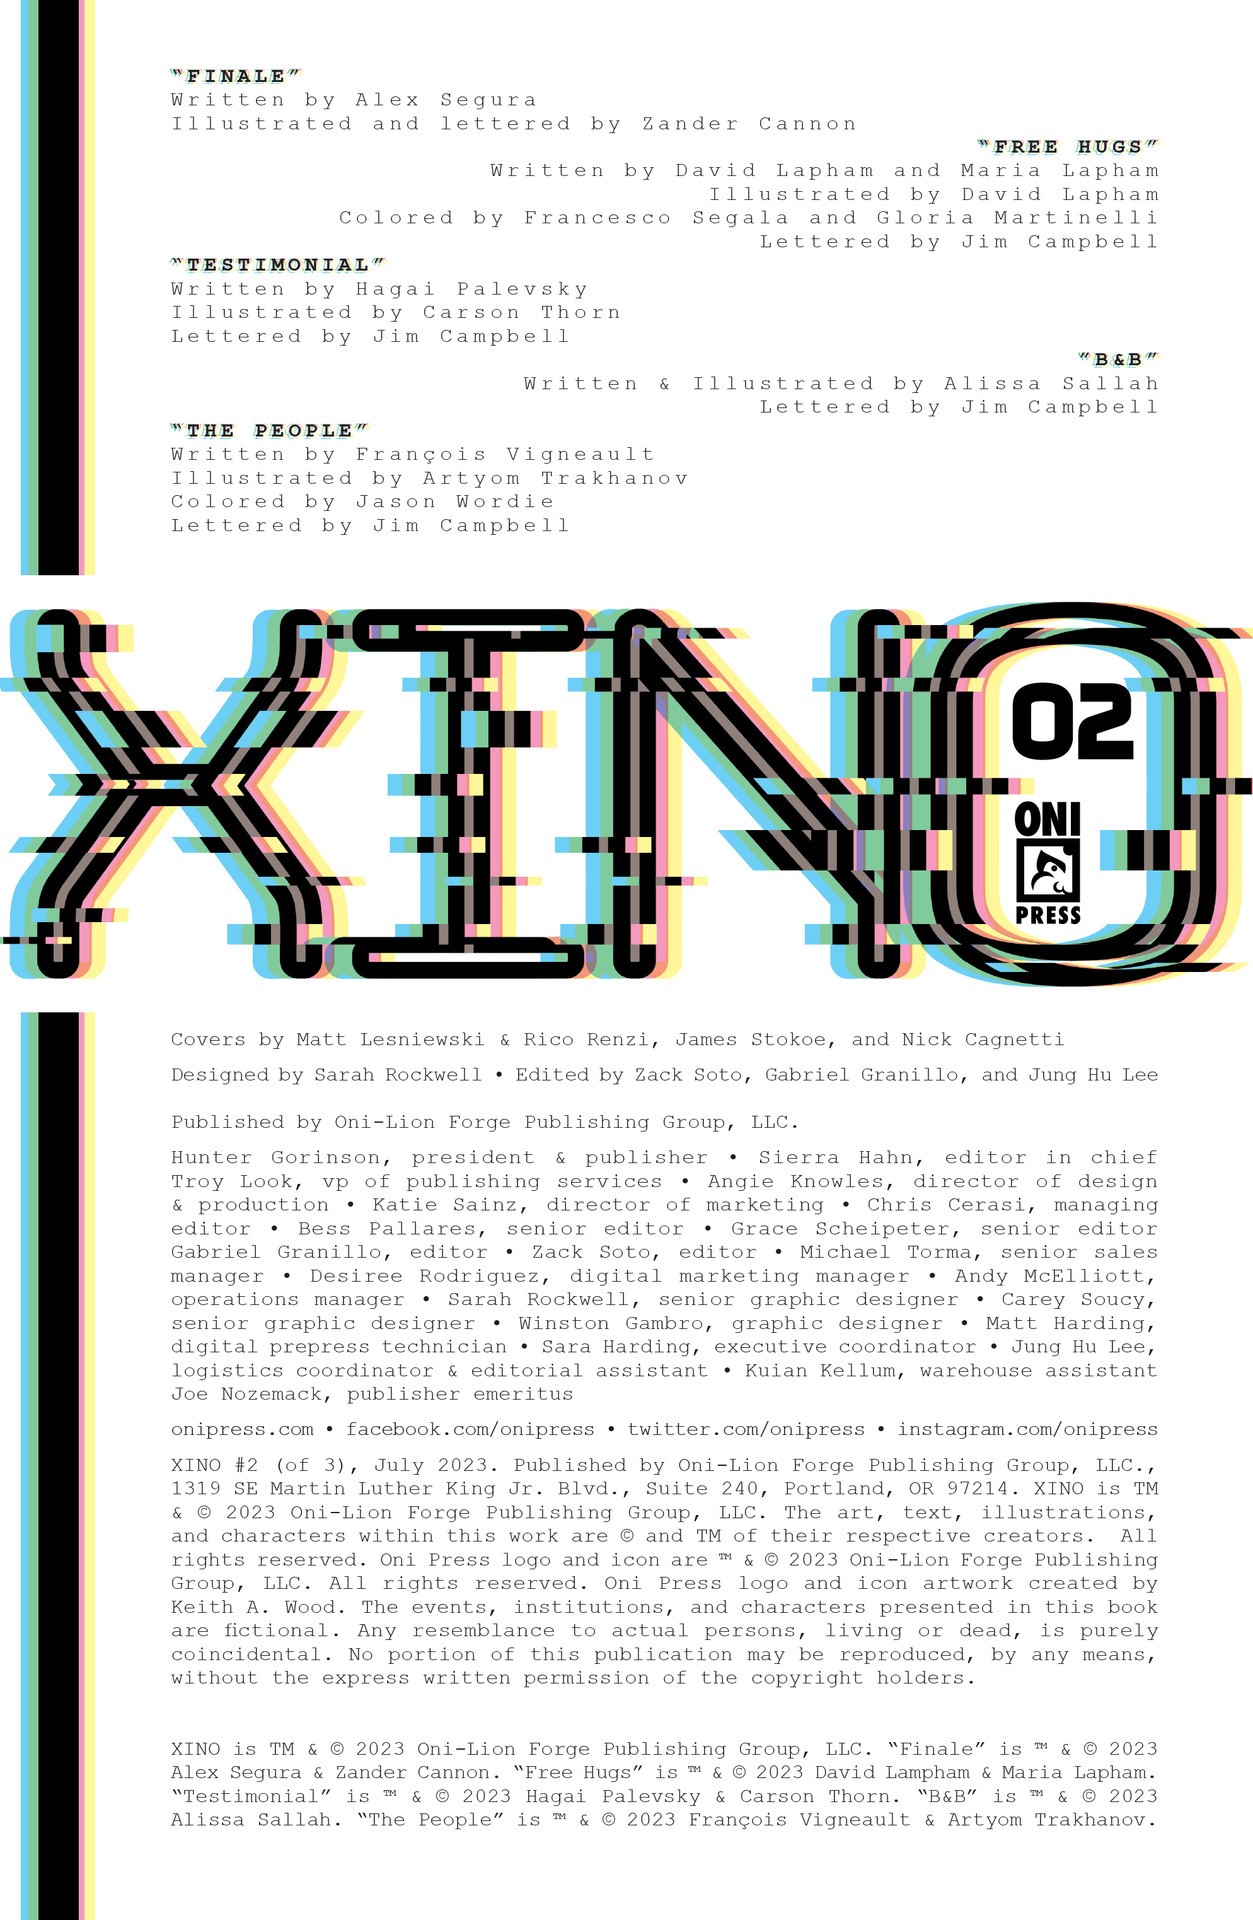 Read online Xino comic -  Issue #2 - 2